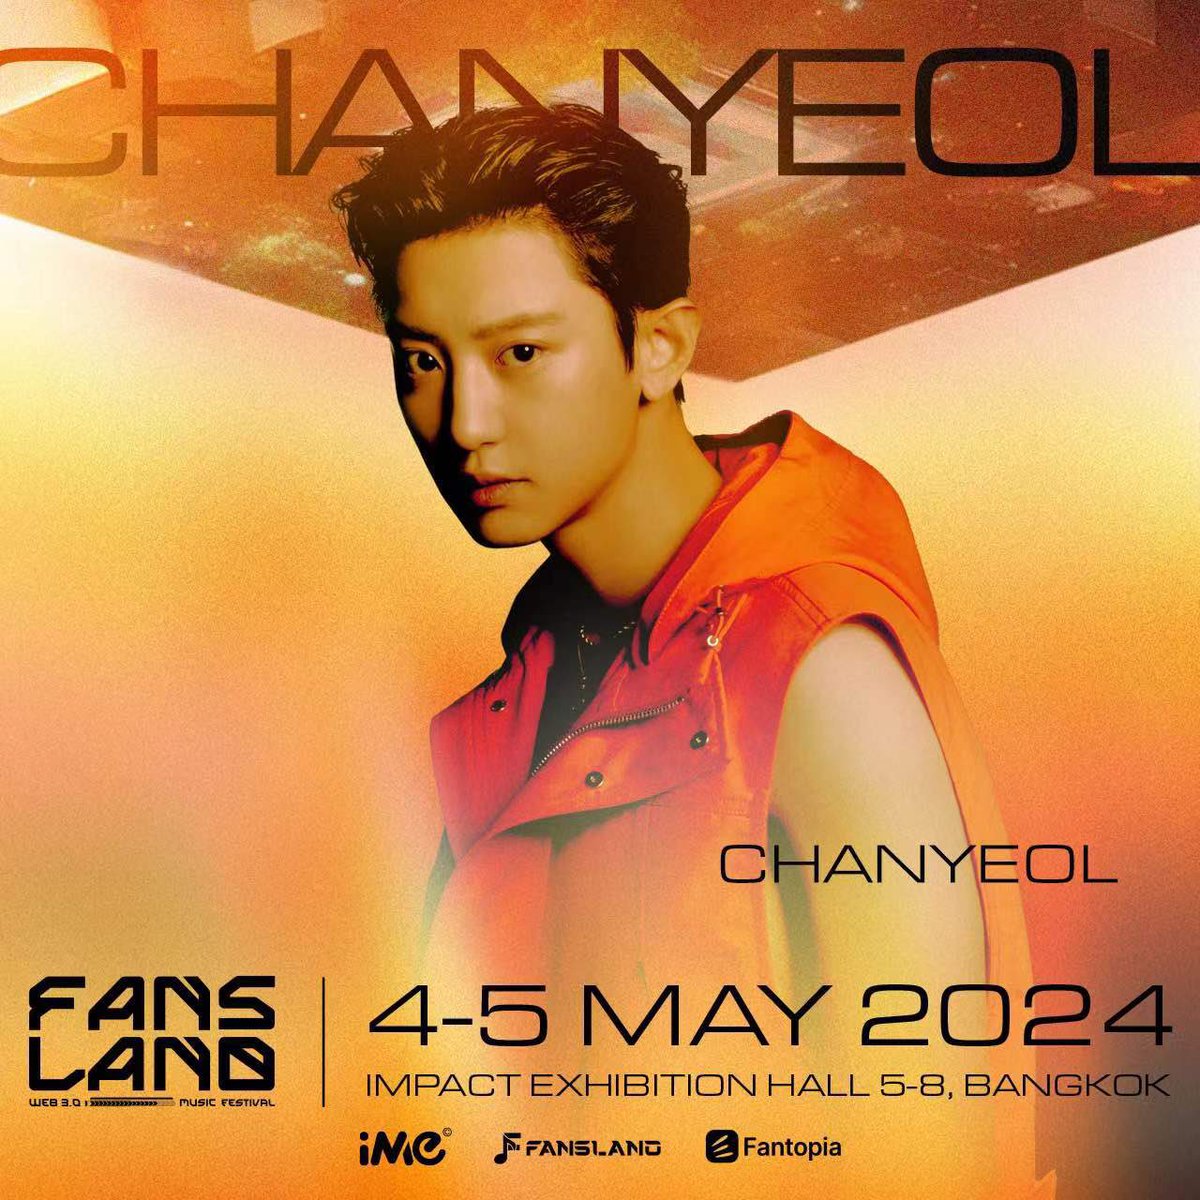 Can’t miss out on this night for all EXO-Ls! Fansland Music Festival is bringing 𝗖𝗛𝗔𝗡𝗬𝗘𝗢𝗟 over! Let’s create an unforgettable experience together and set this house on fire🔥 #CHANYEOL #Web3MusicFestival #Fansland #Web3 #WAGMI #iMe #iMeThailand #iMeAsia #Fantopia